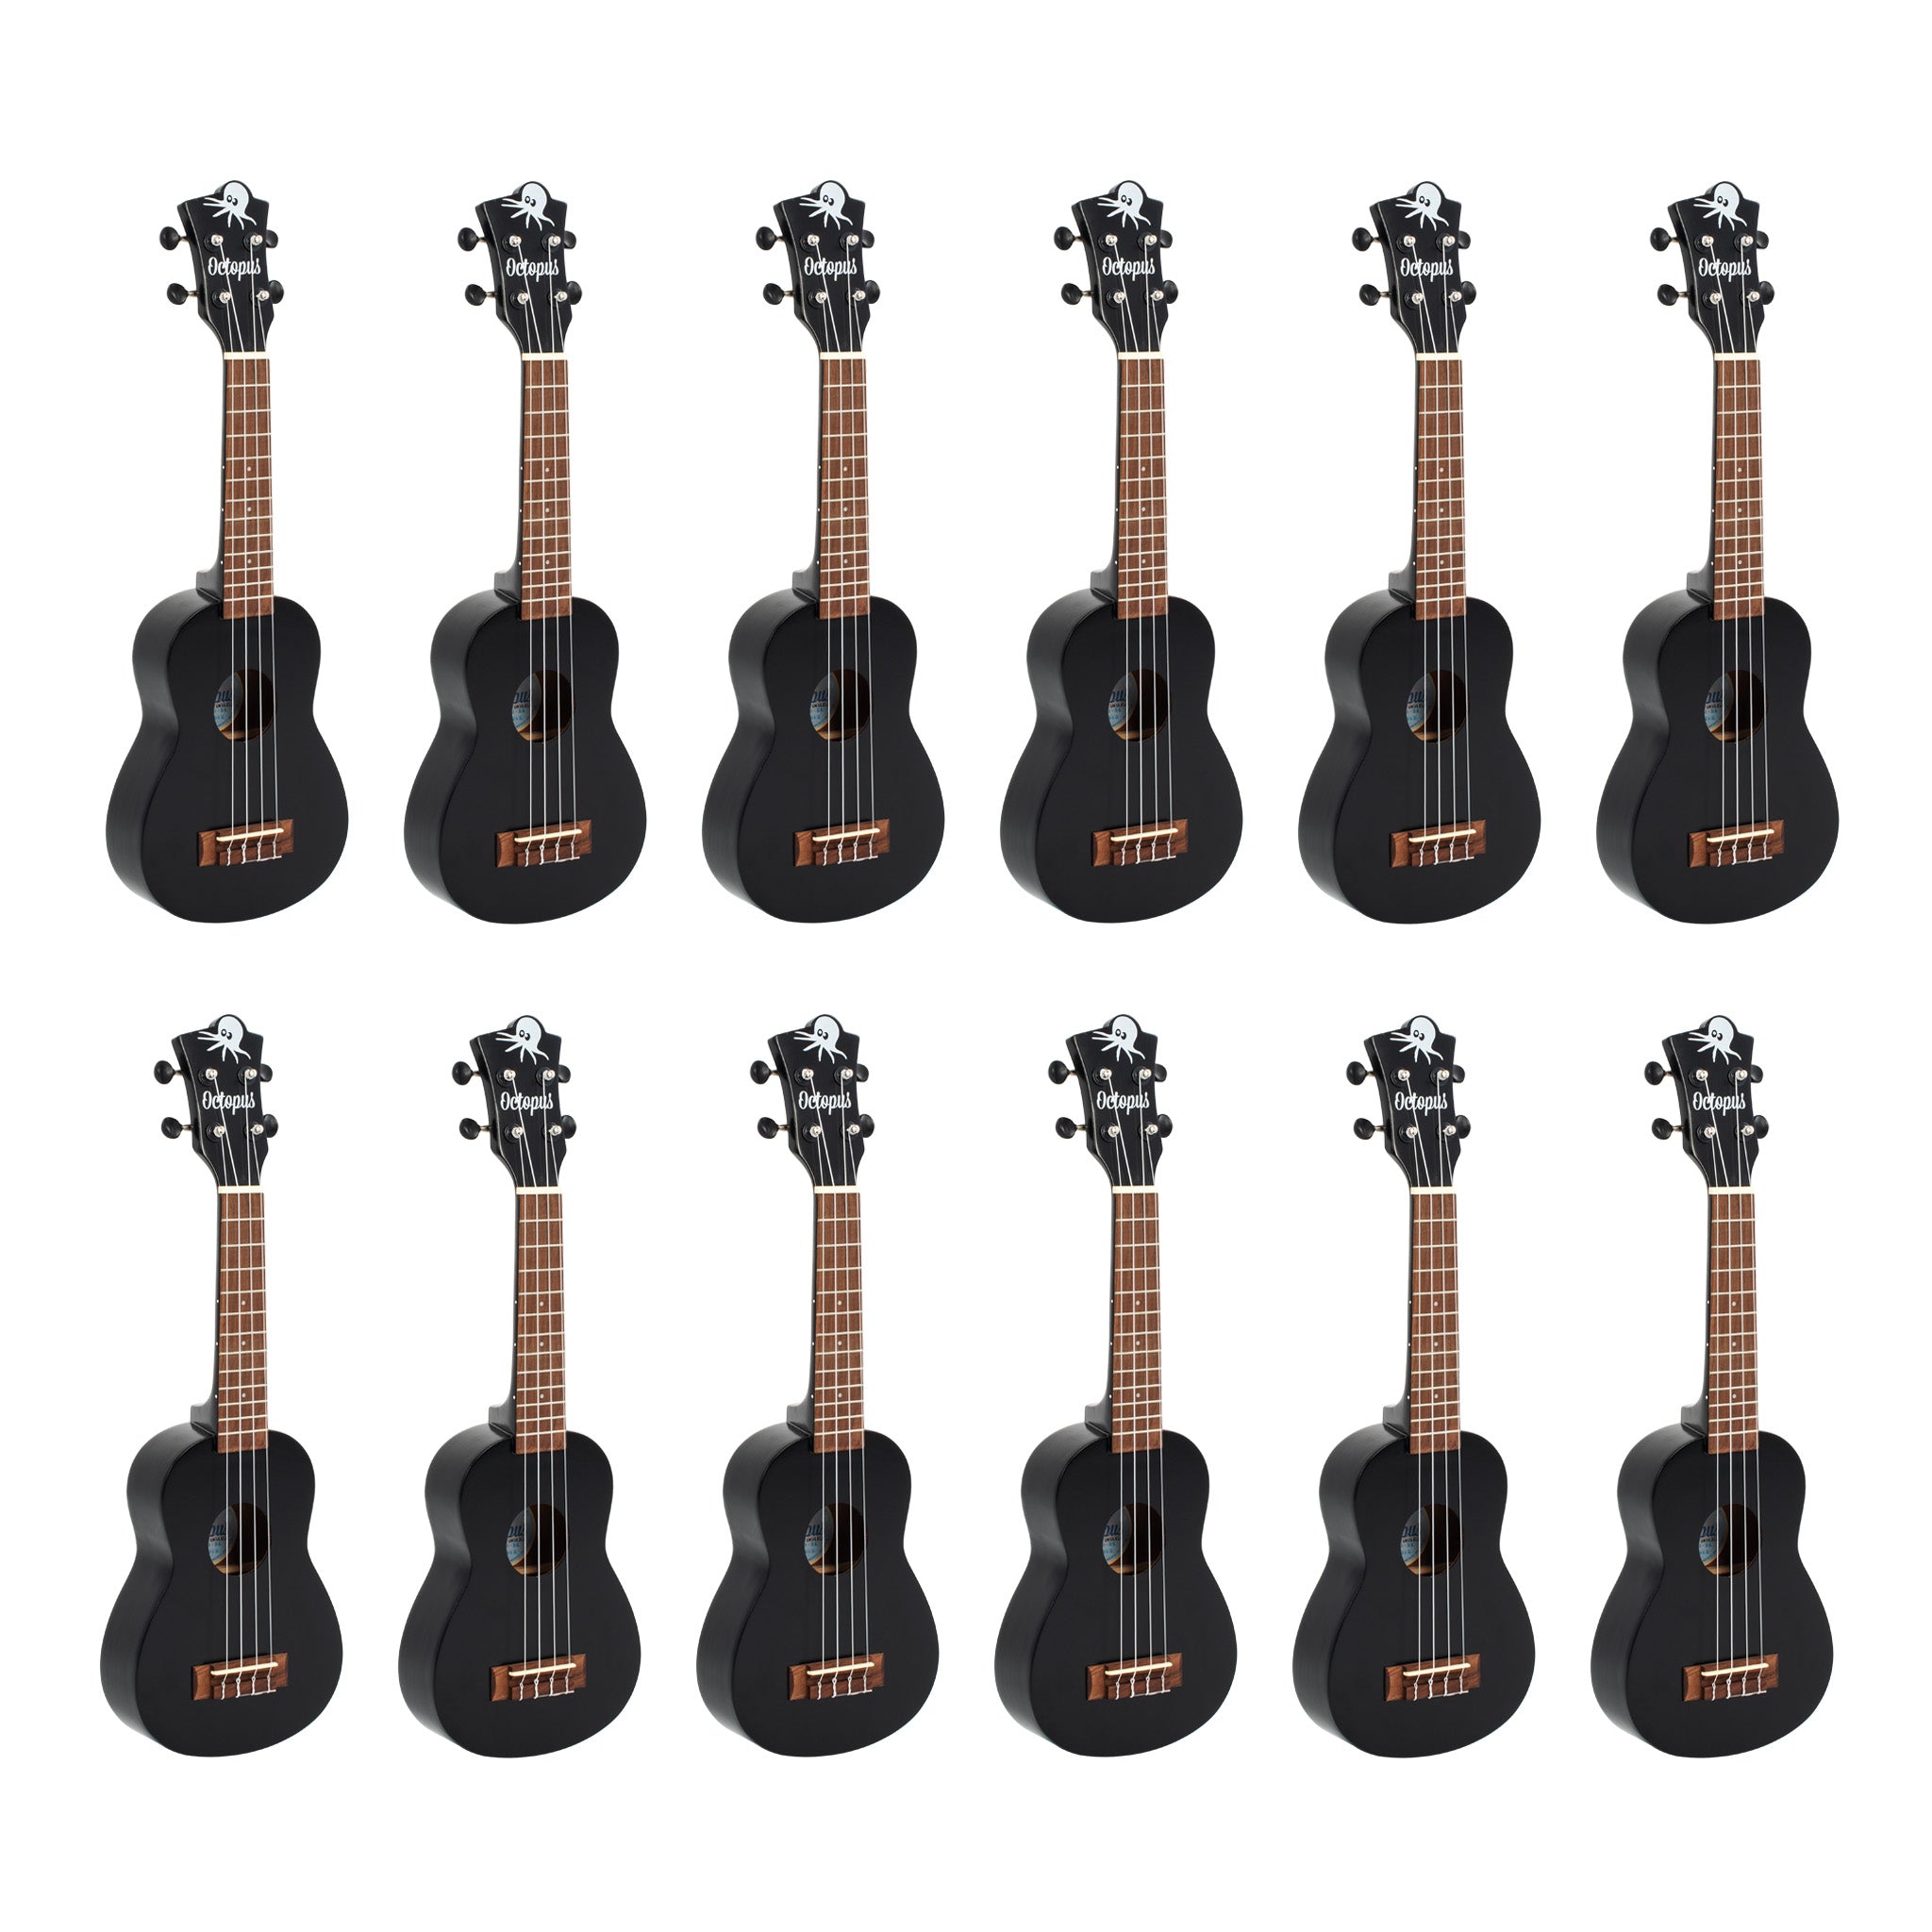 Octopus universal stand for multiple ukuleles